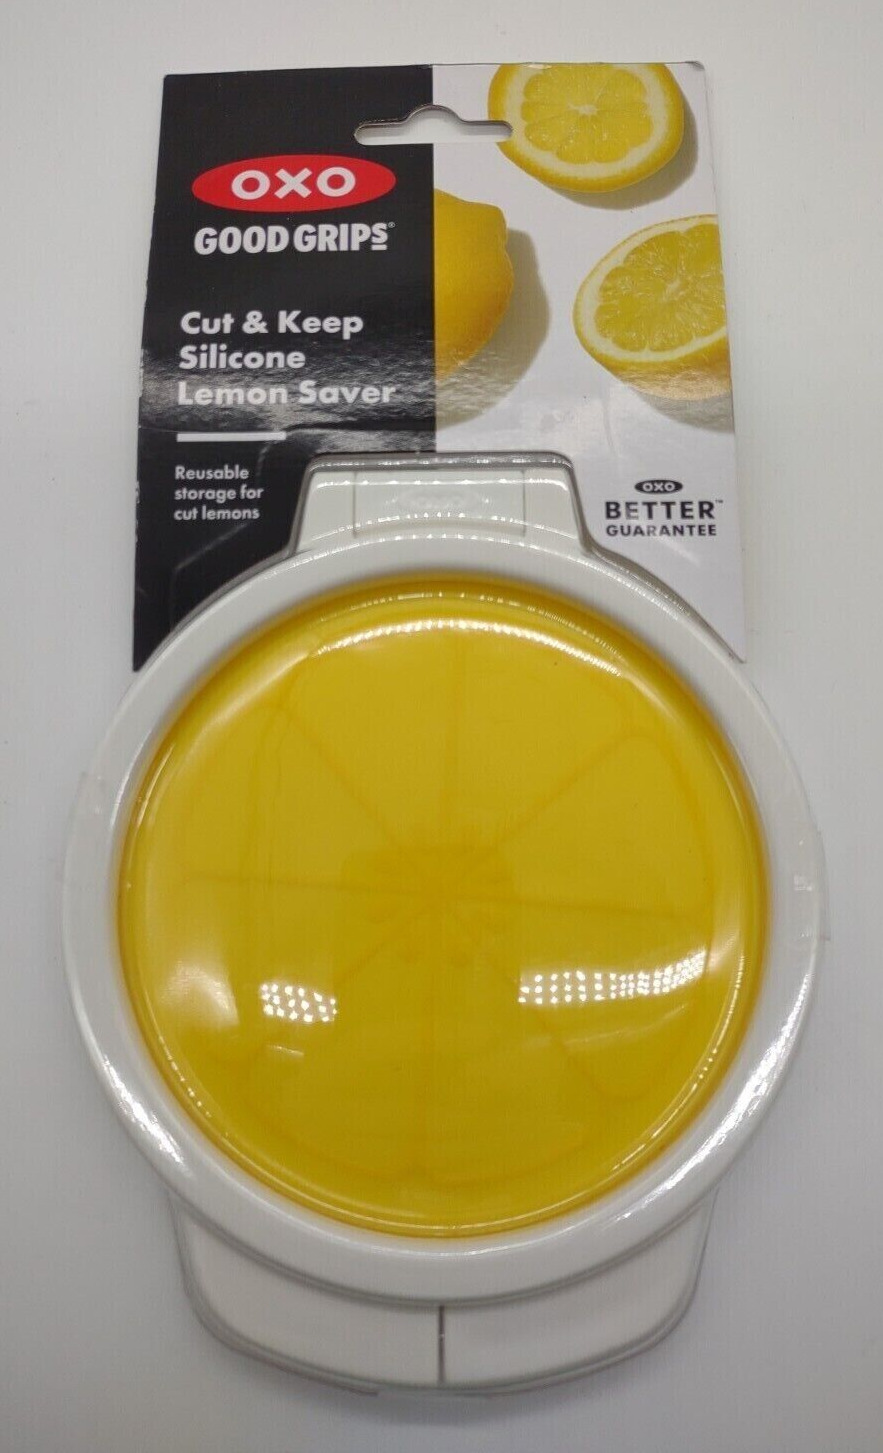 Oxo Good Grips Cut & Keep Silicone Lemon Saver Kitchen Cooking